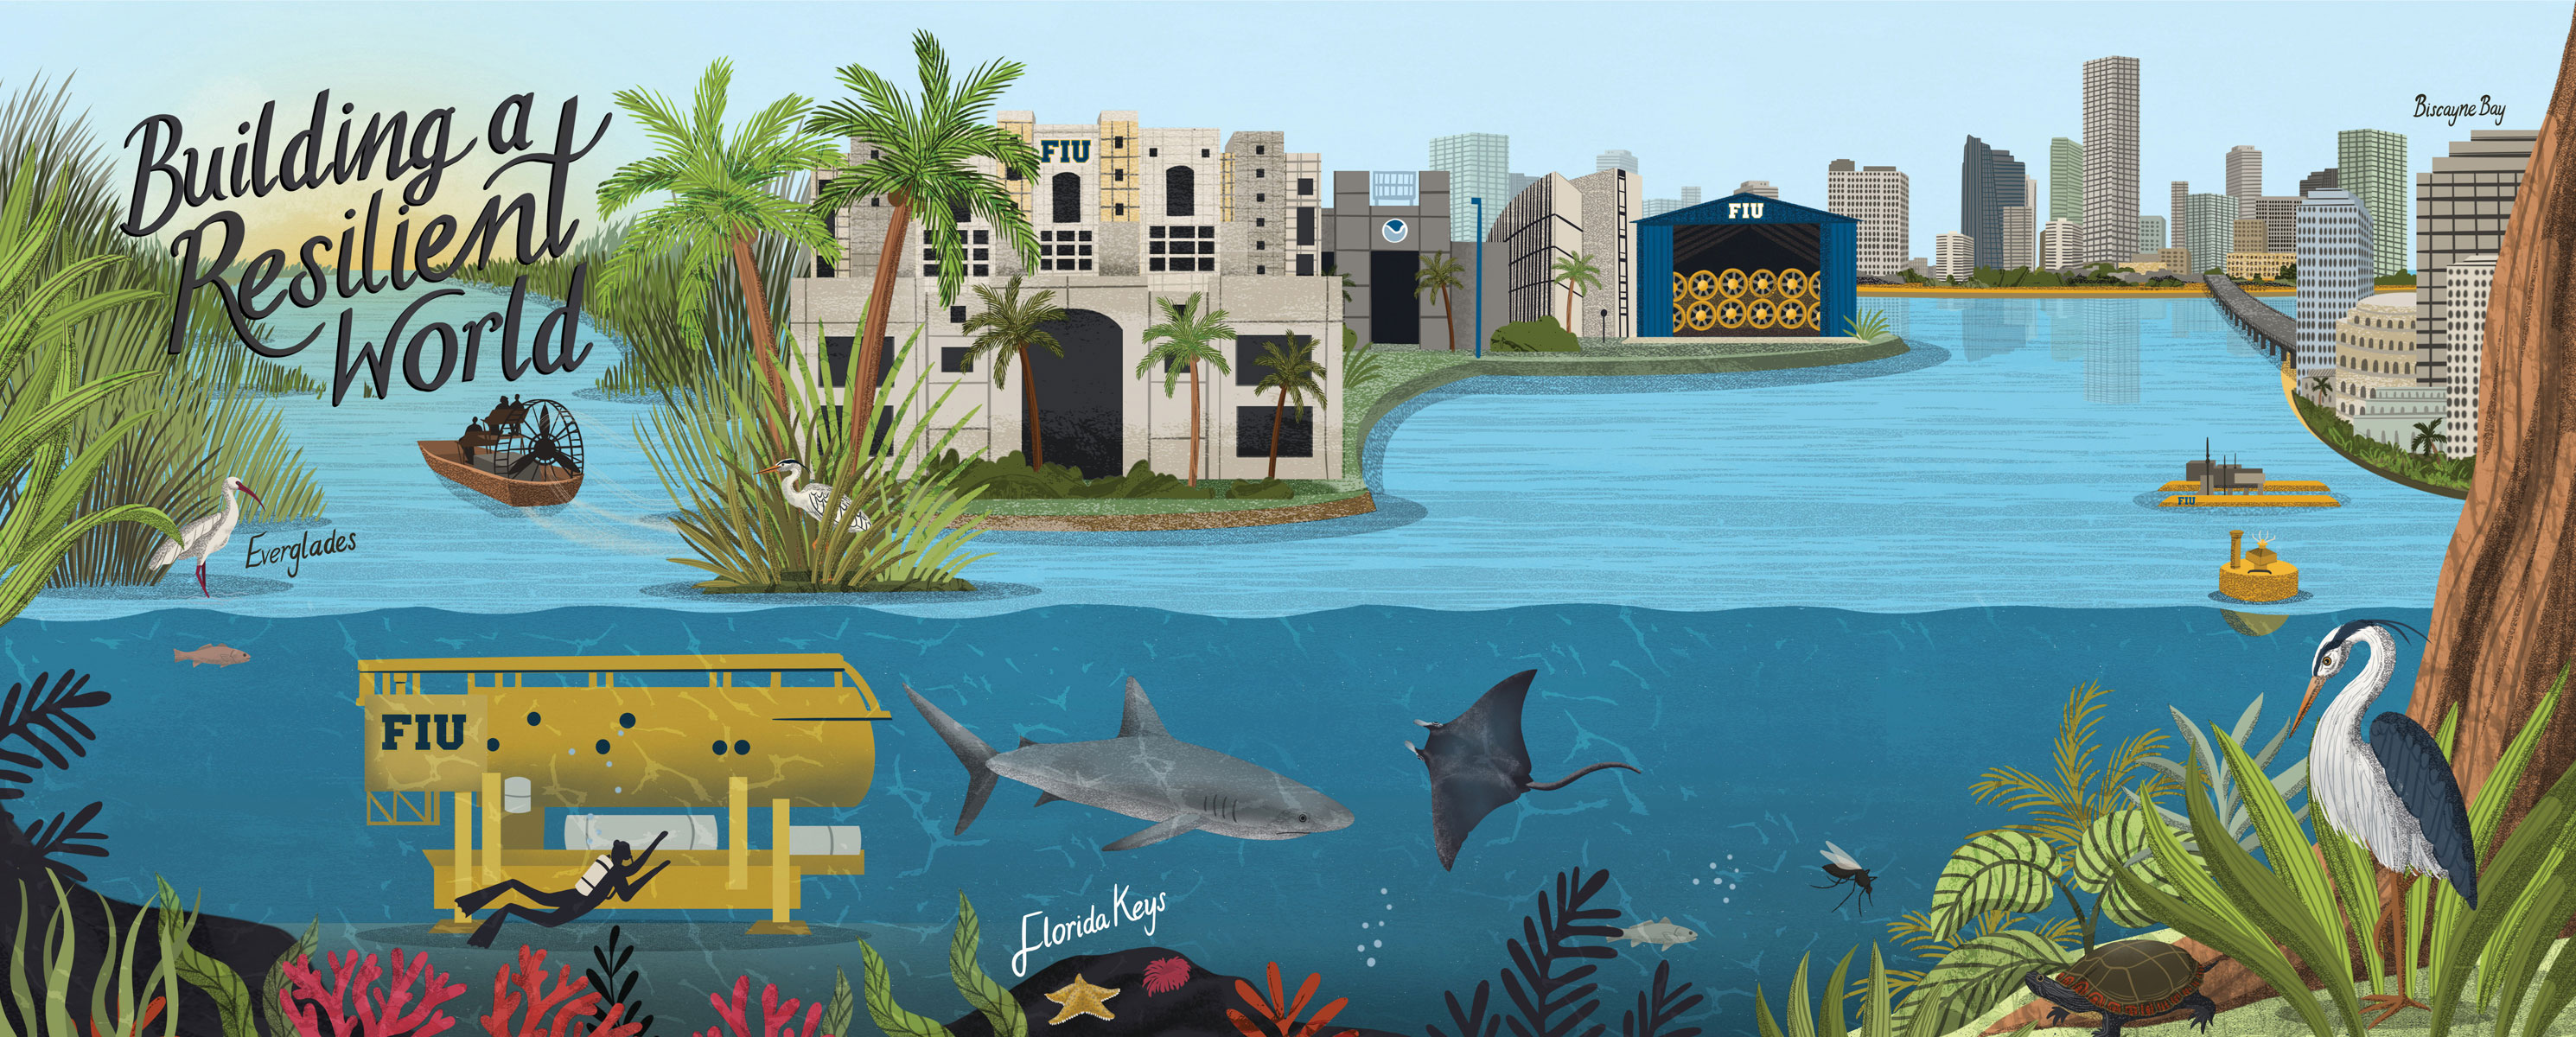 FIU is Building a Resilient World